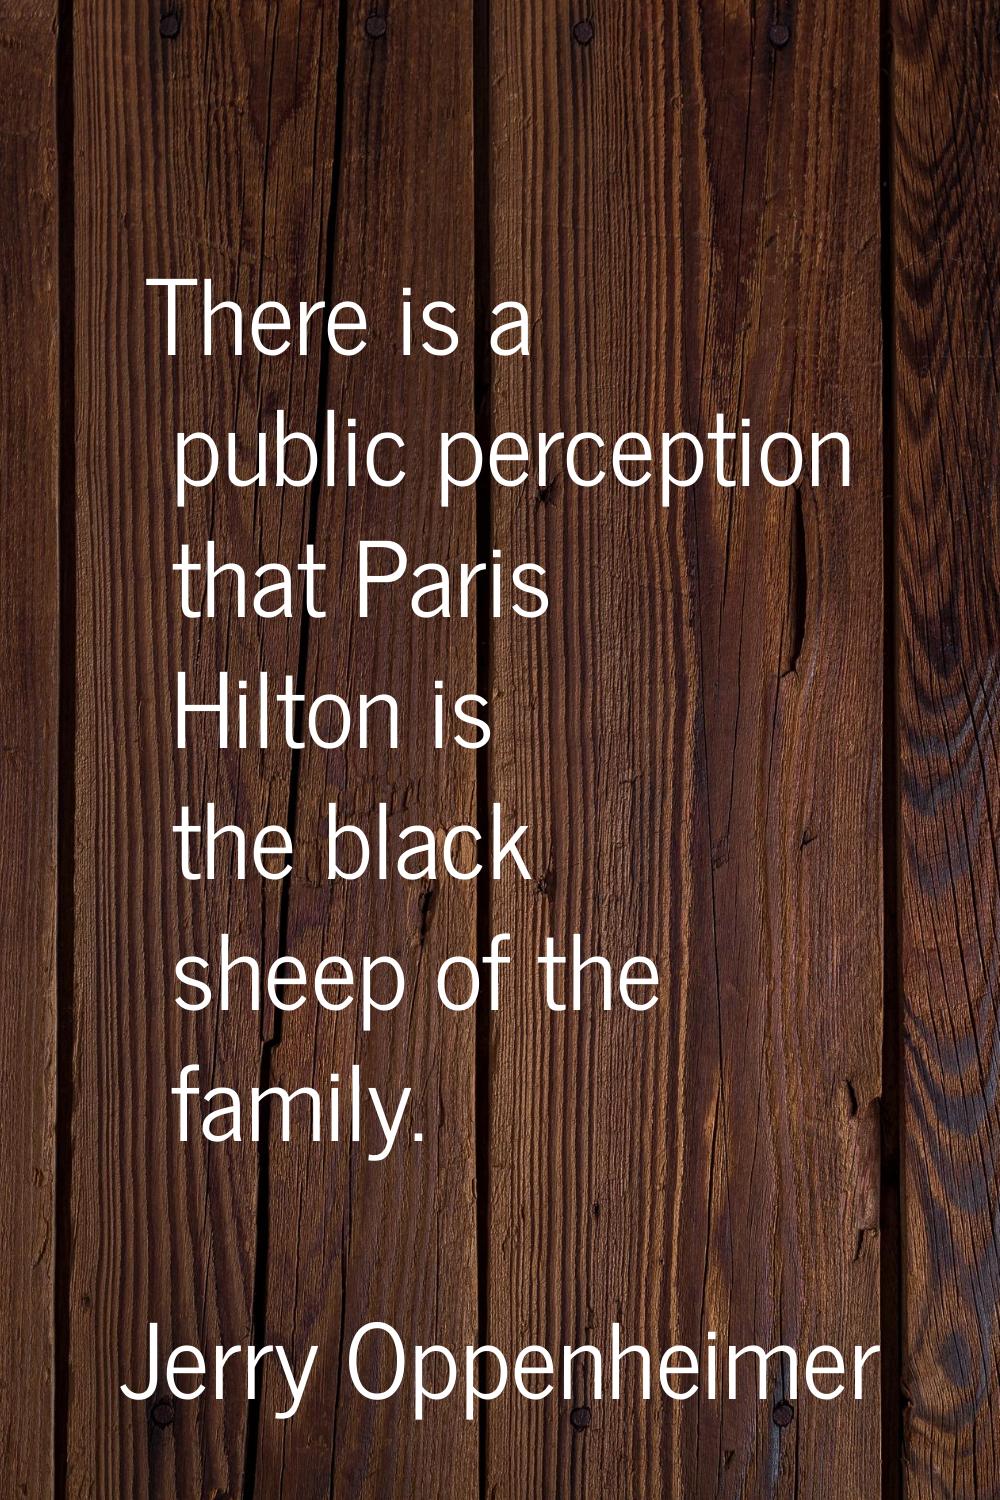 There is a public perception that Paris Hilton is the black sheep of the family.